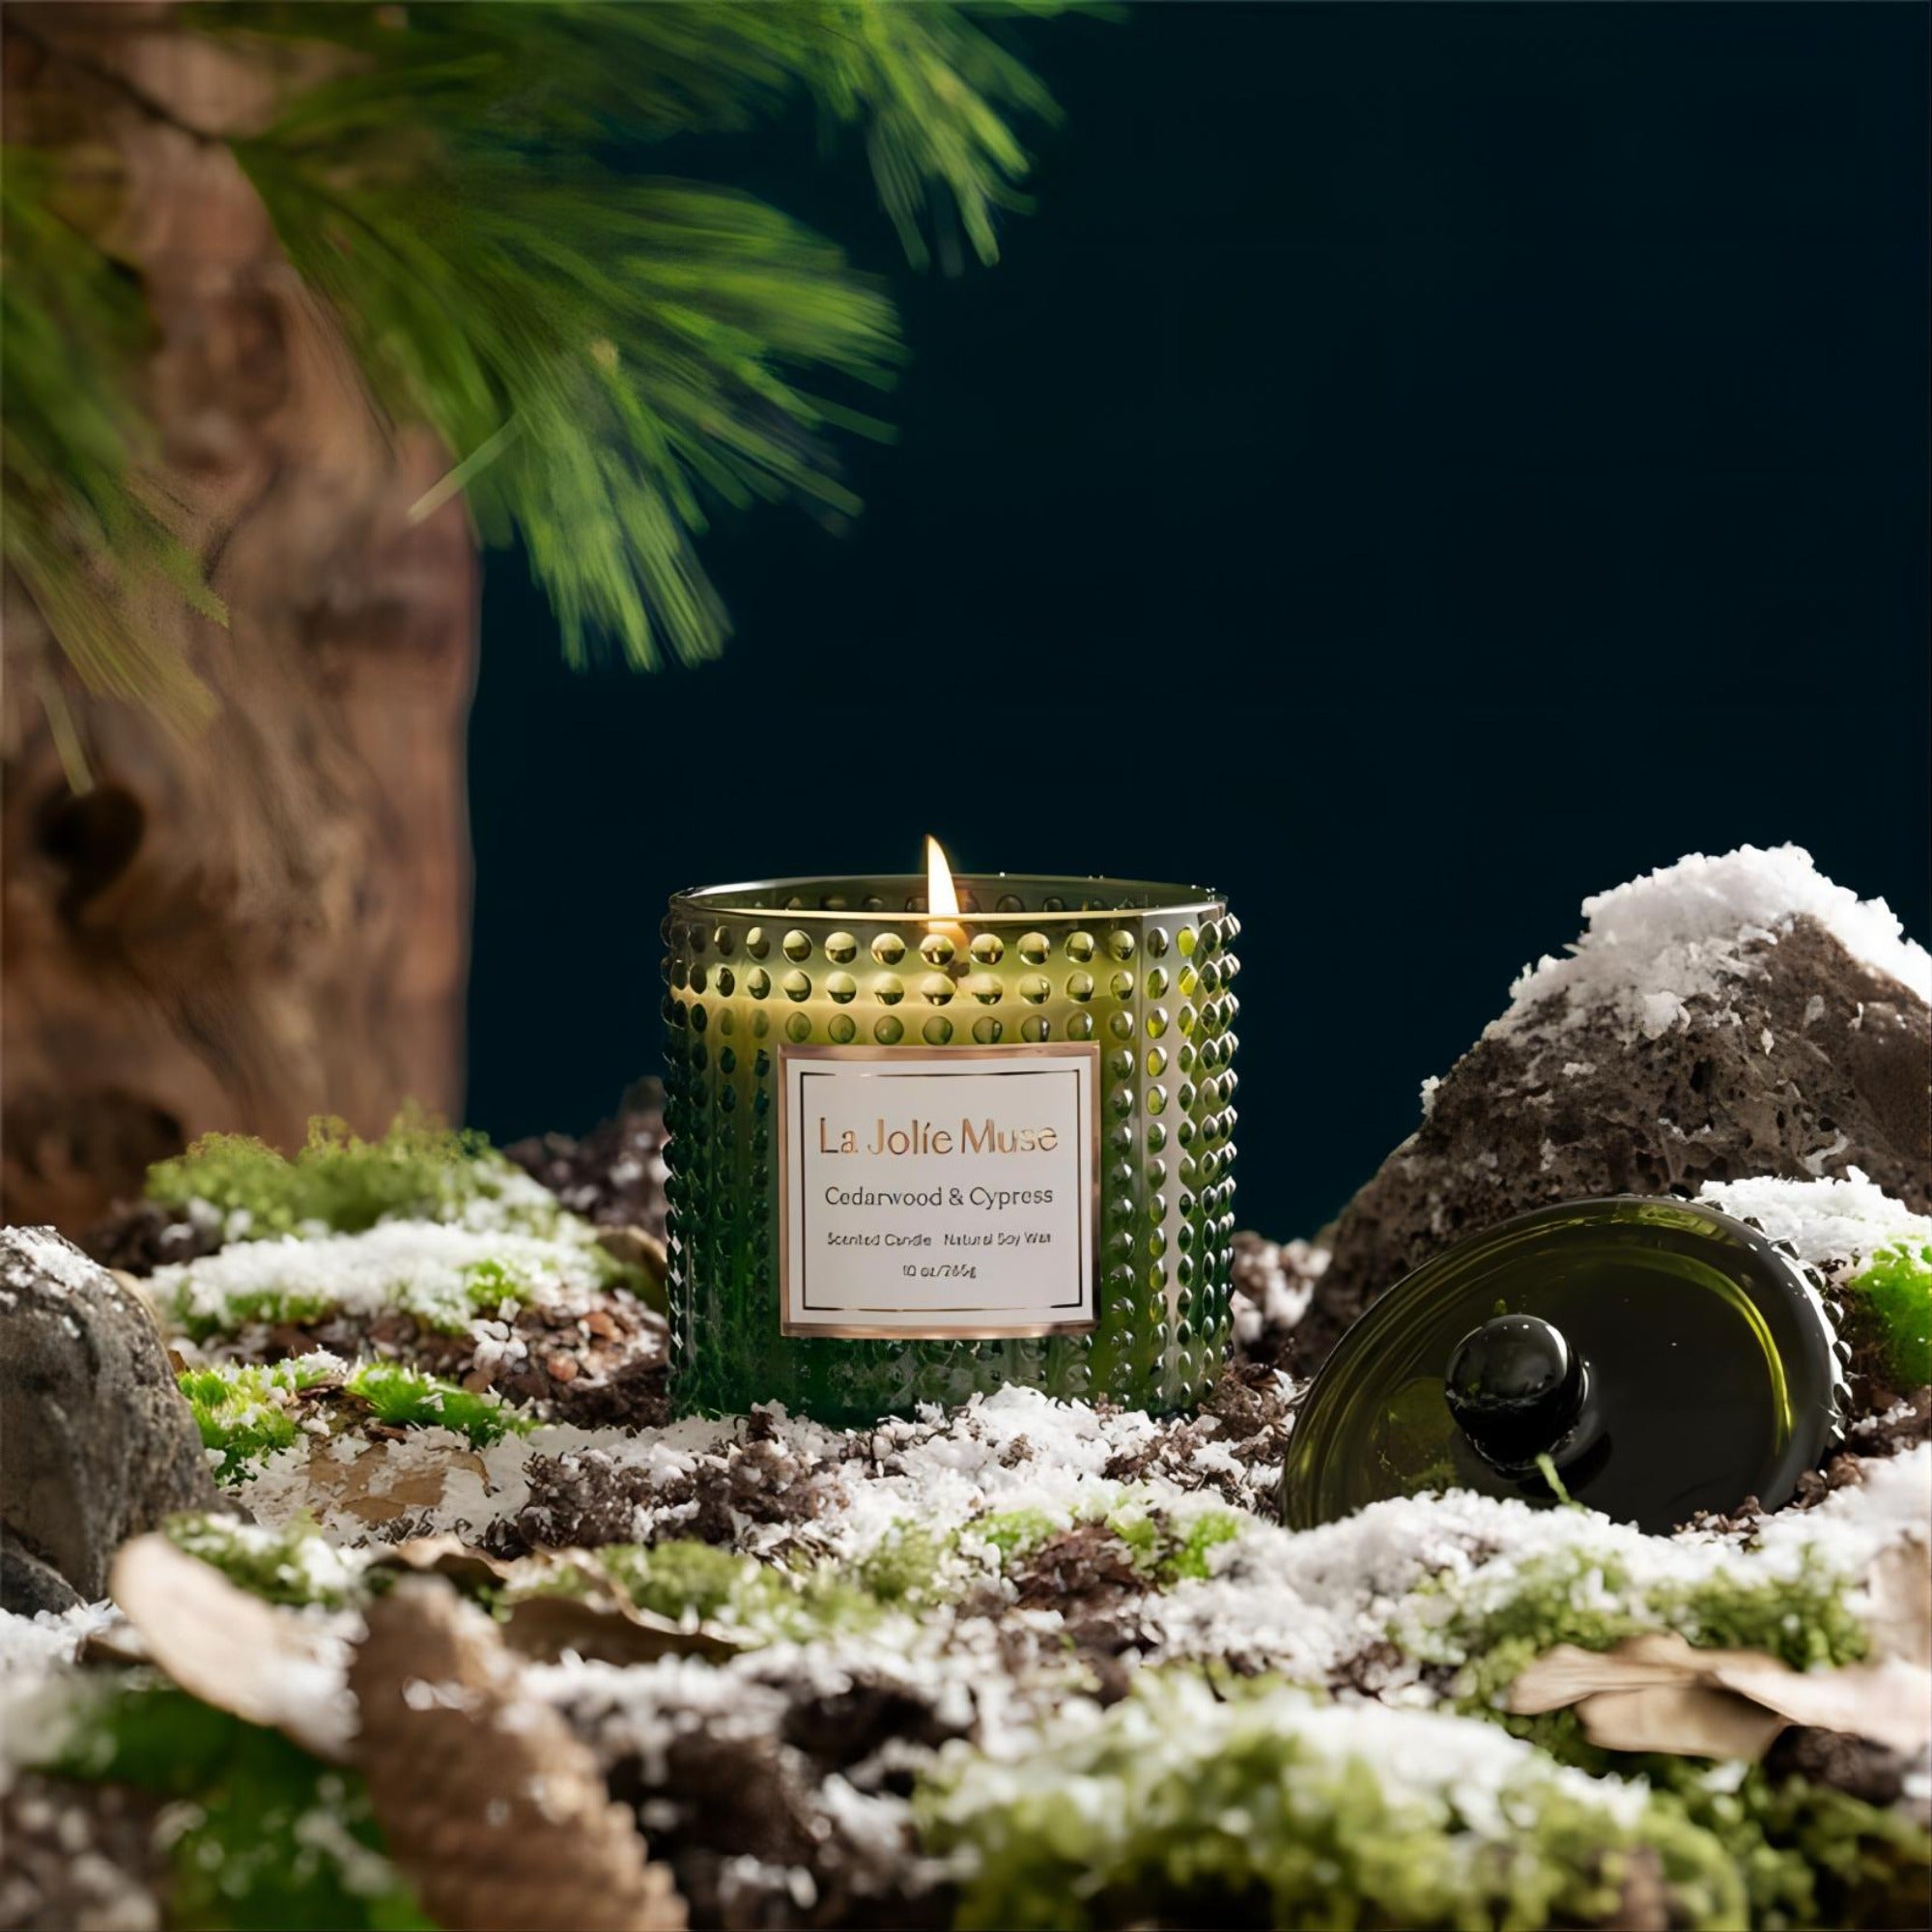  Photo shot of a lit Marvella - Cypress & Cedarwood 10oz candle placed on grass covered with artificial snow, surrounded by scattered stones, pine cones, and leaves